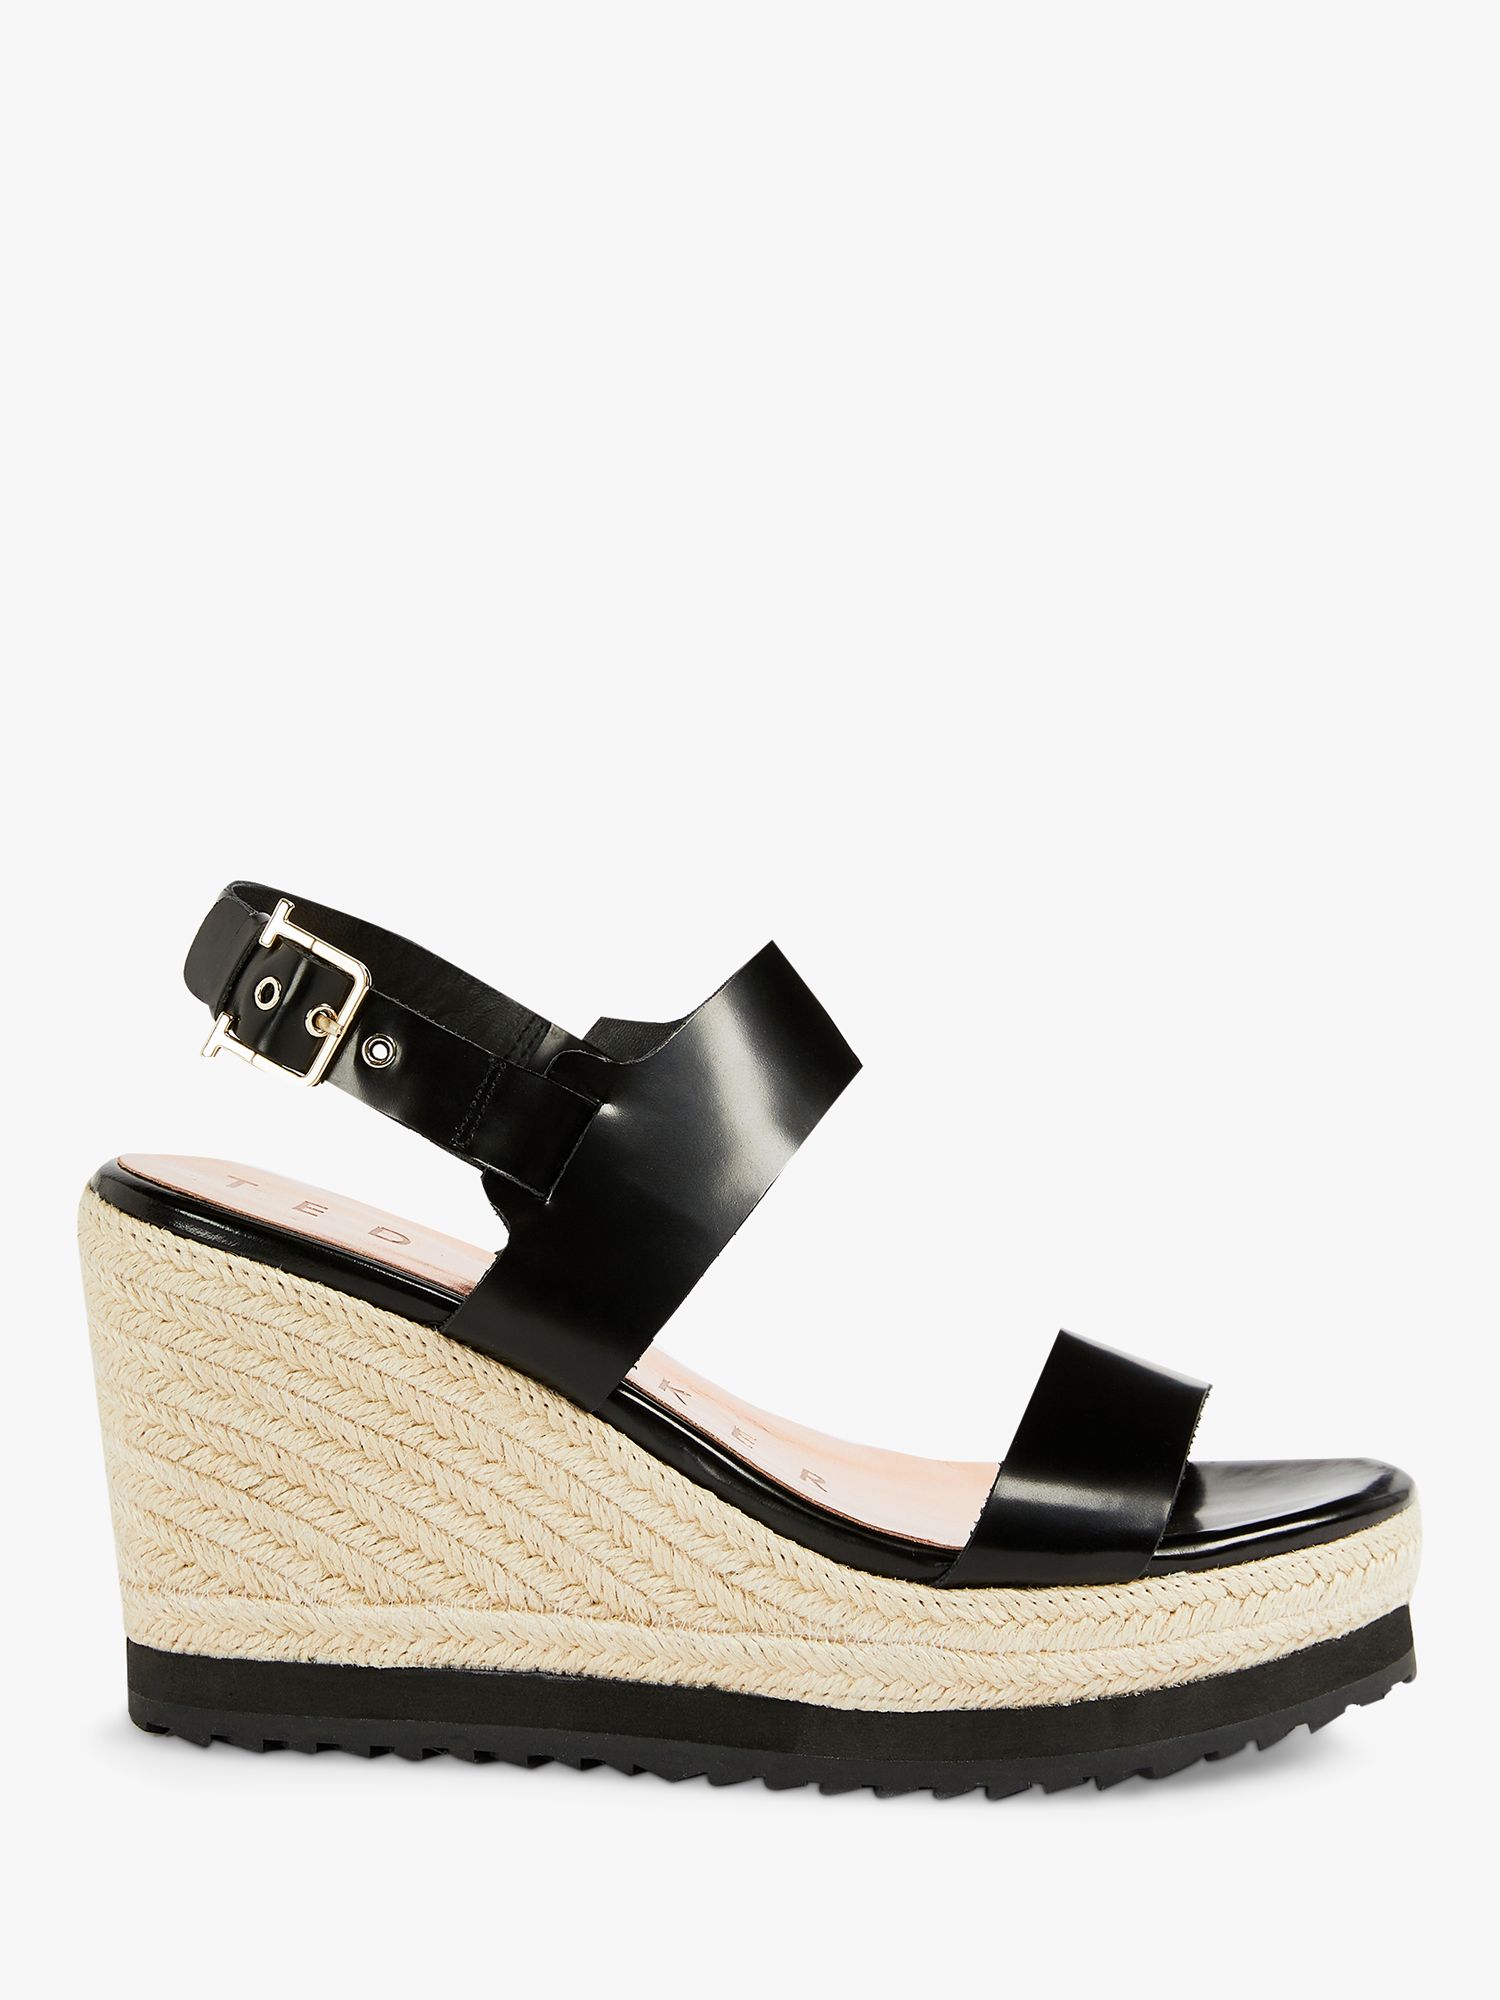 Ted Baker Archei Leather Wedge Heel Sandals